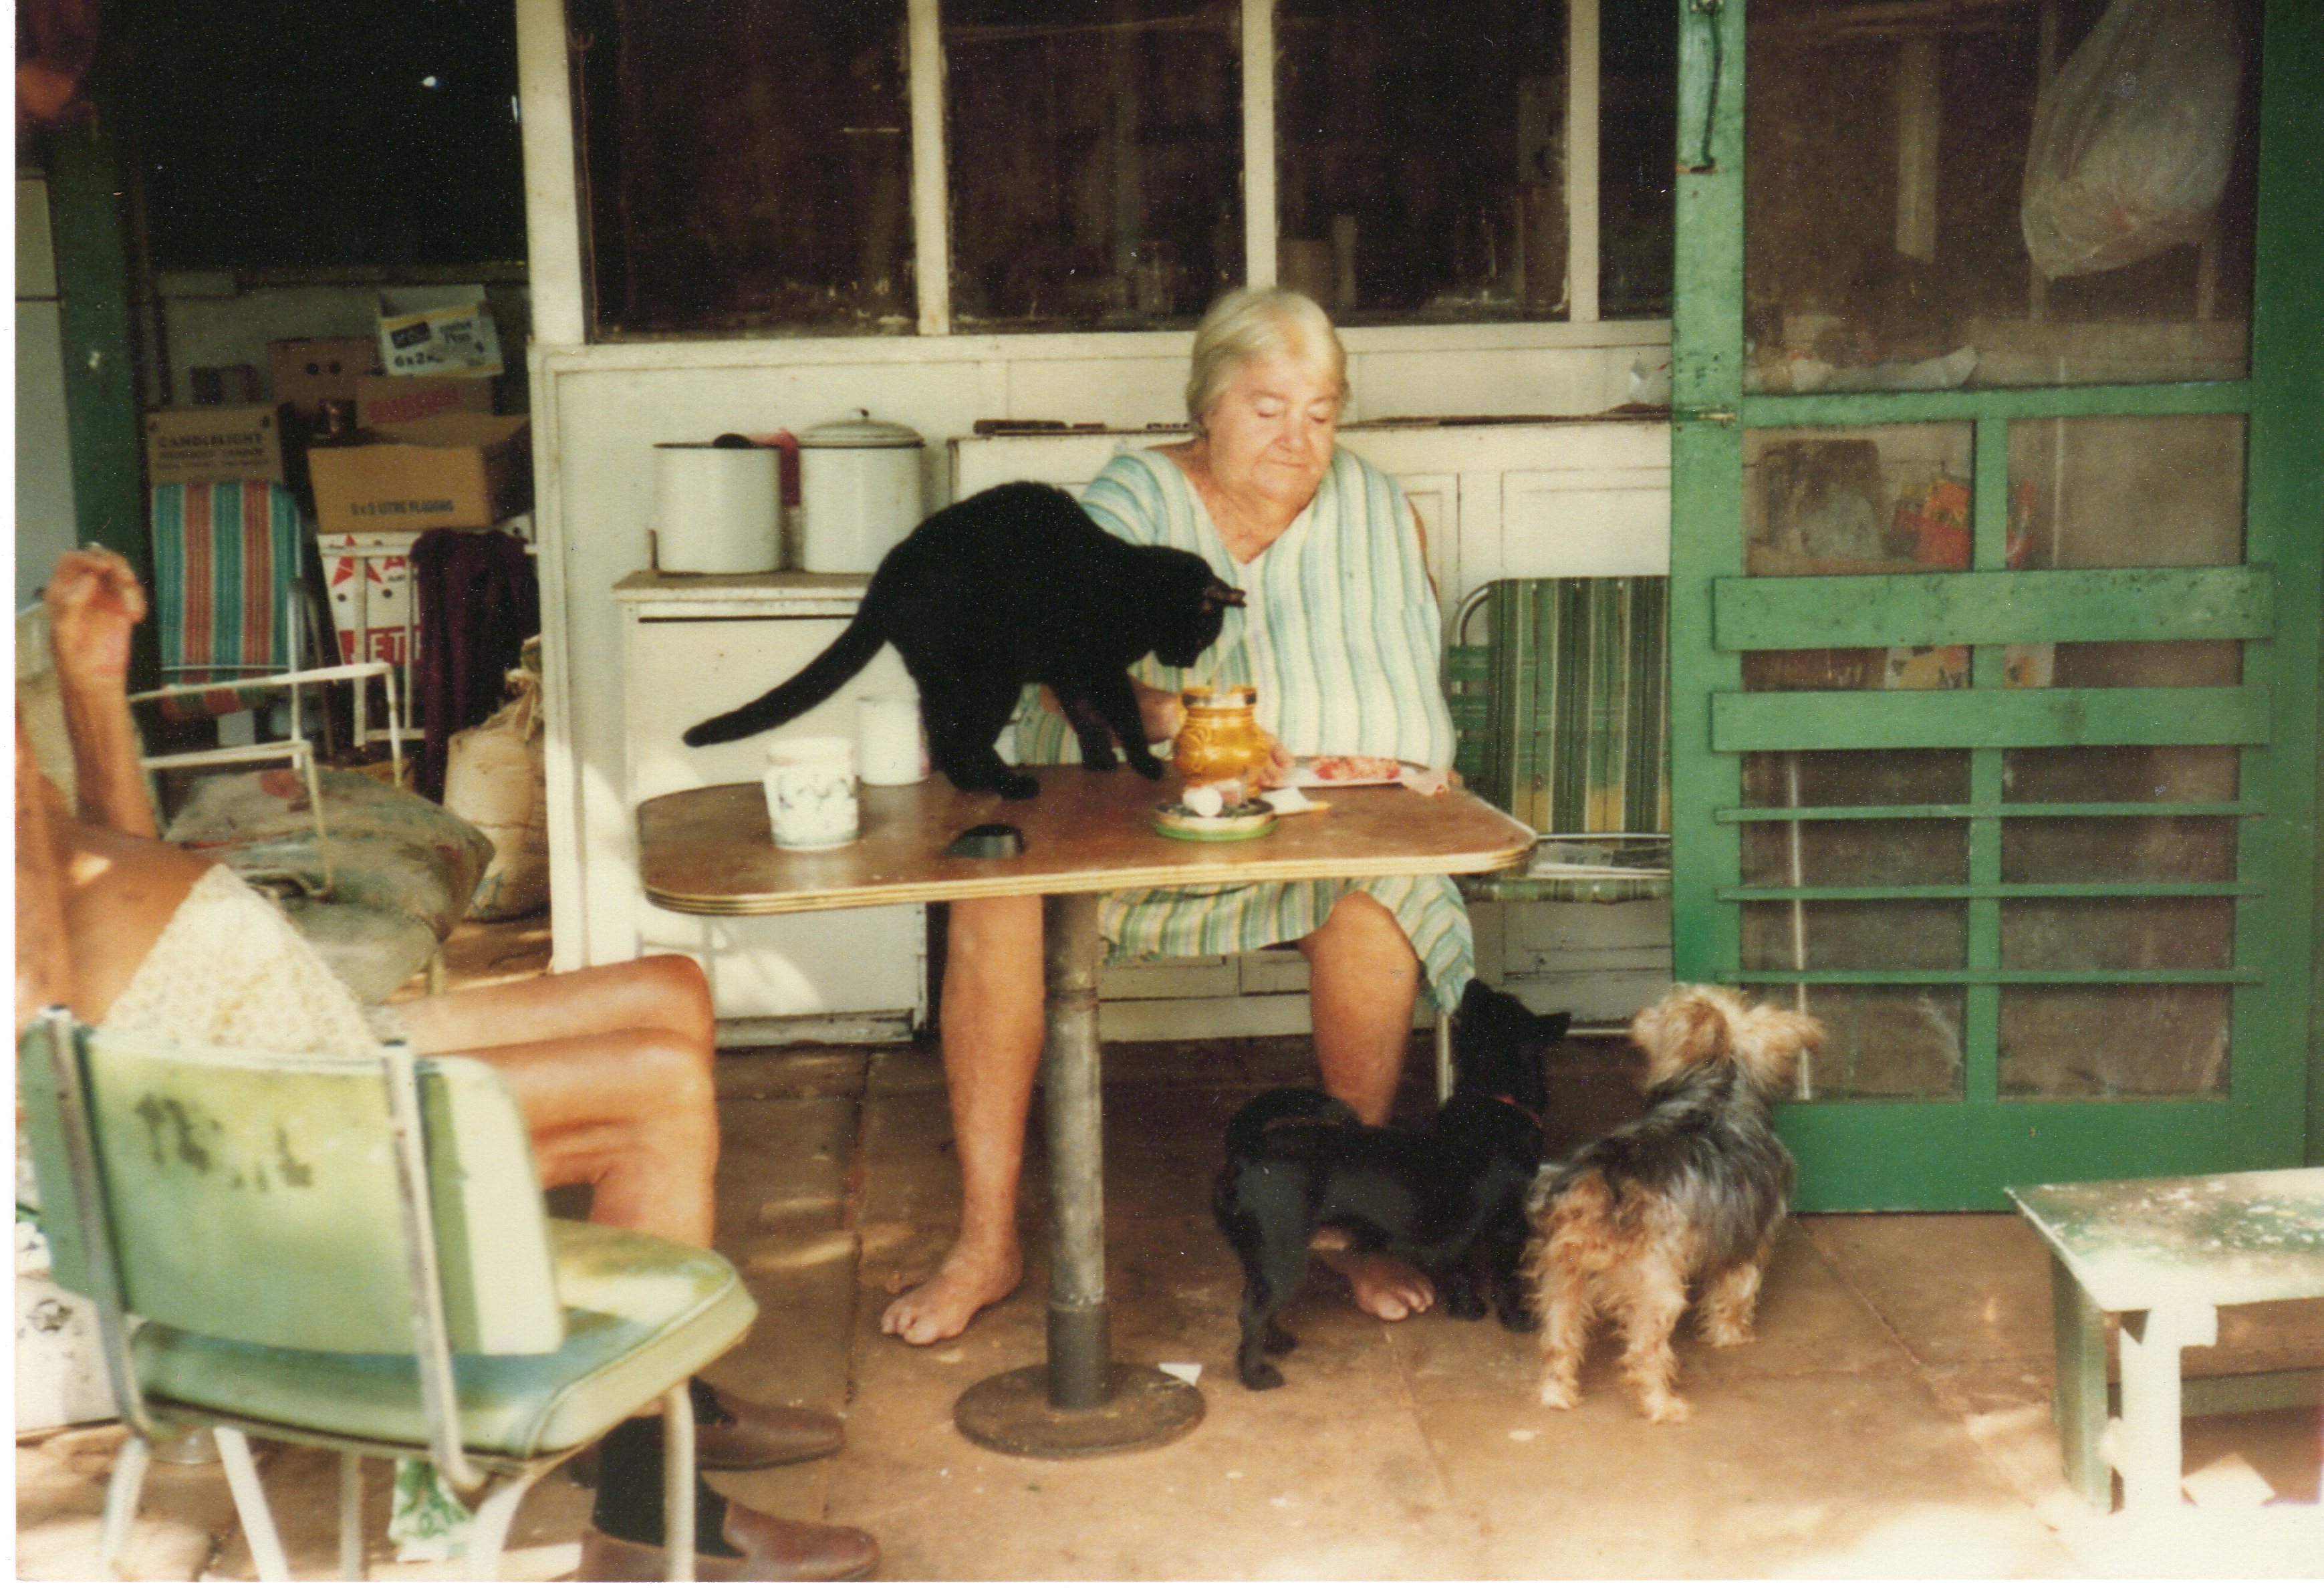 Sister O’Keeffe relaxing with Johnno, her husband, and animals at her home “Stray Leaves”, now known as O’Keeffe house.